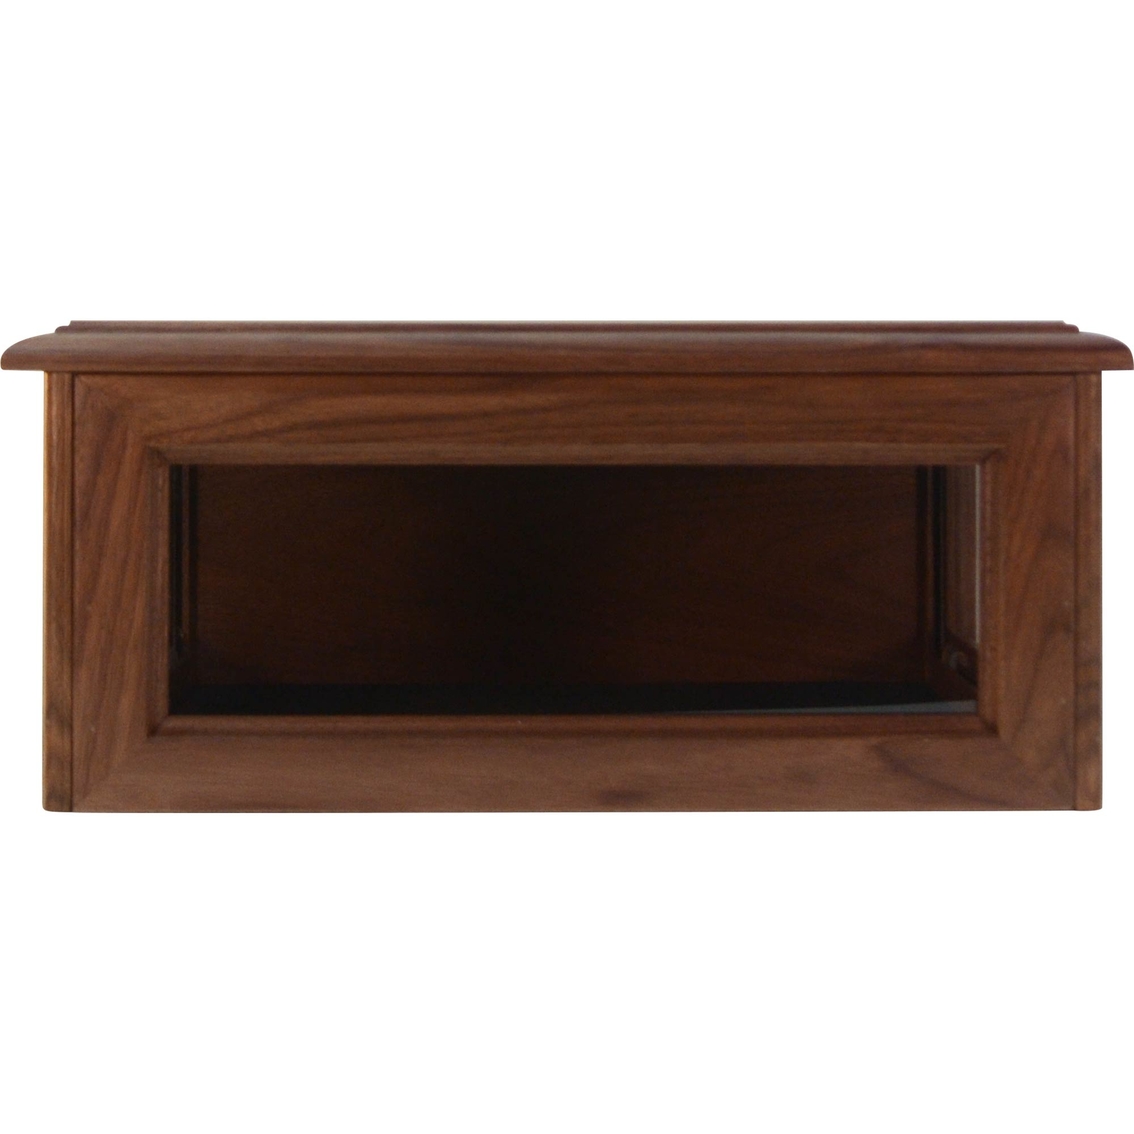 DomEx Hardwoods Hat/Cover Box, Solid Top, Walnut - Image 2 of 3